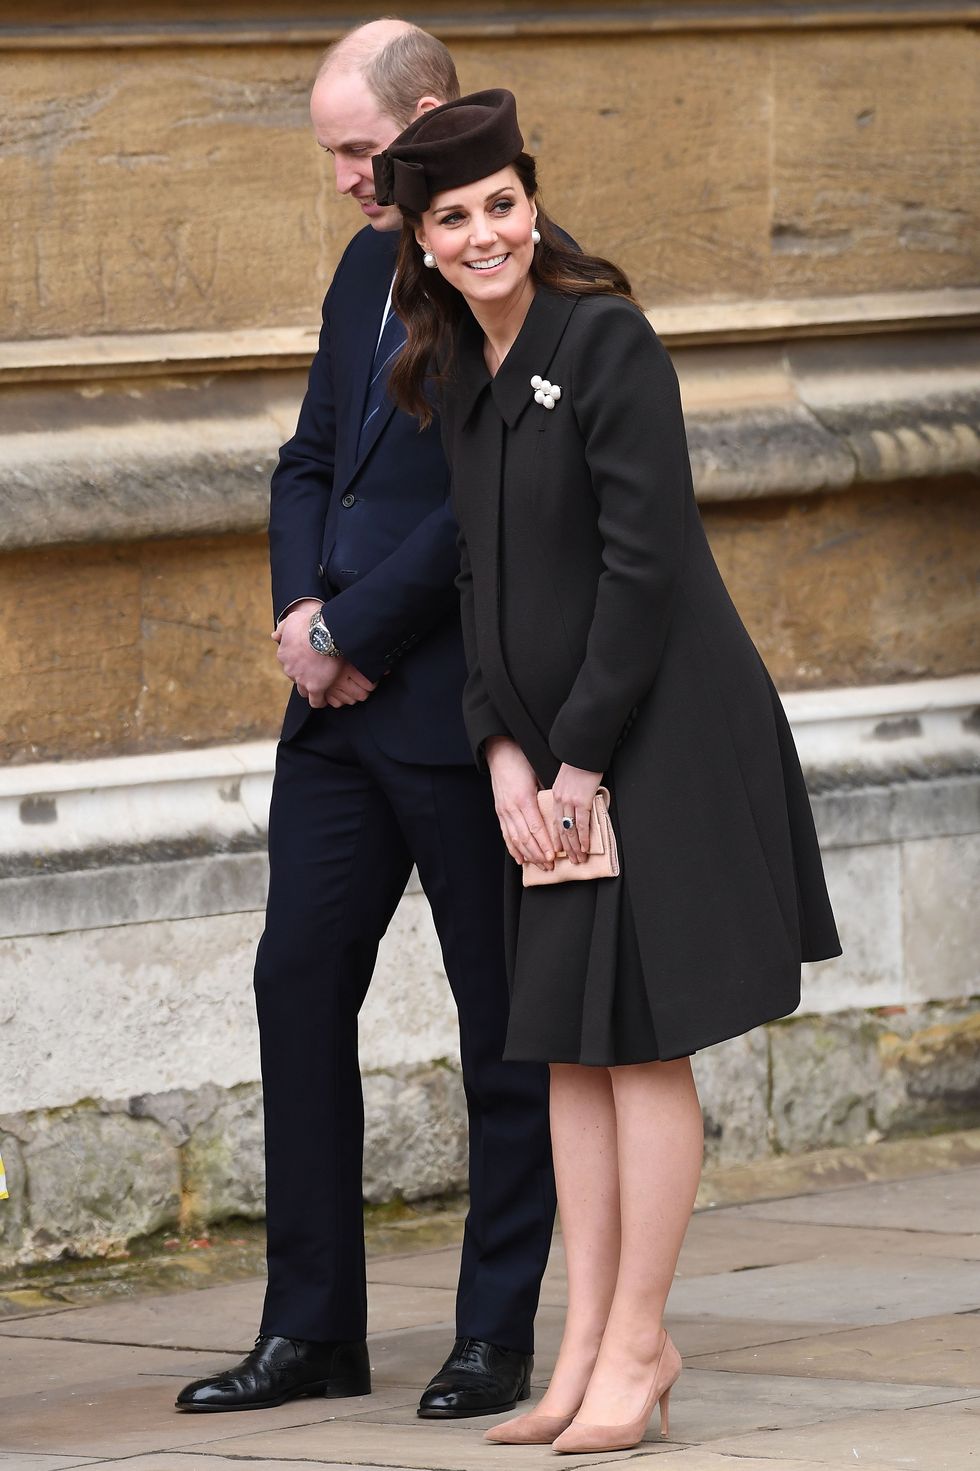 the royal family attend easter service at st george's chapel, windsor